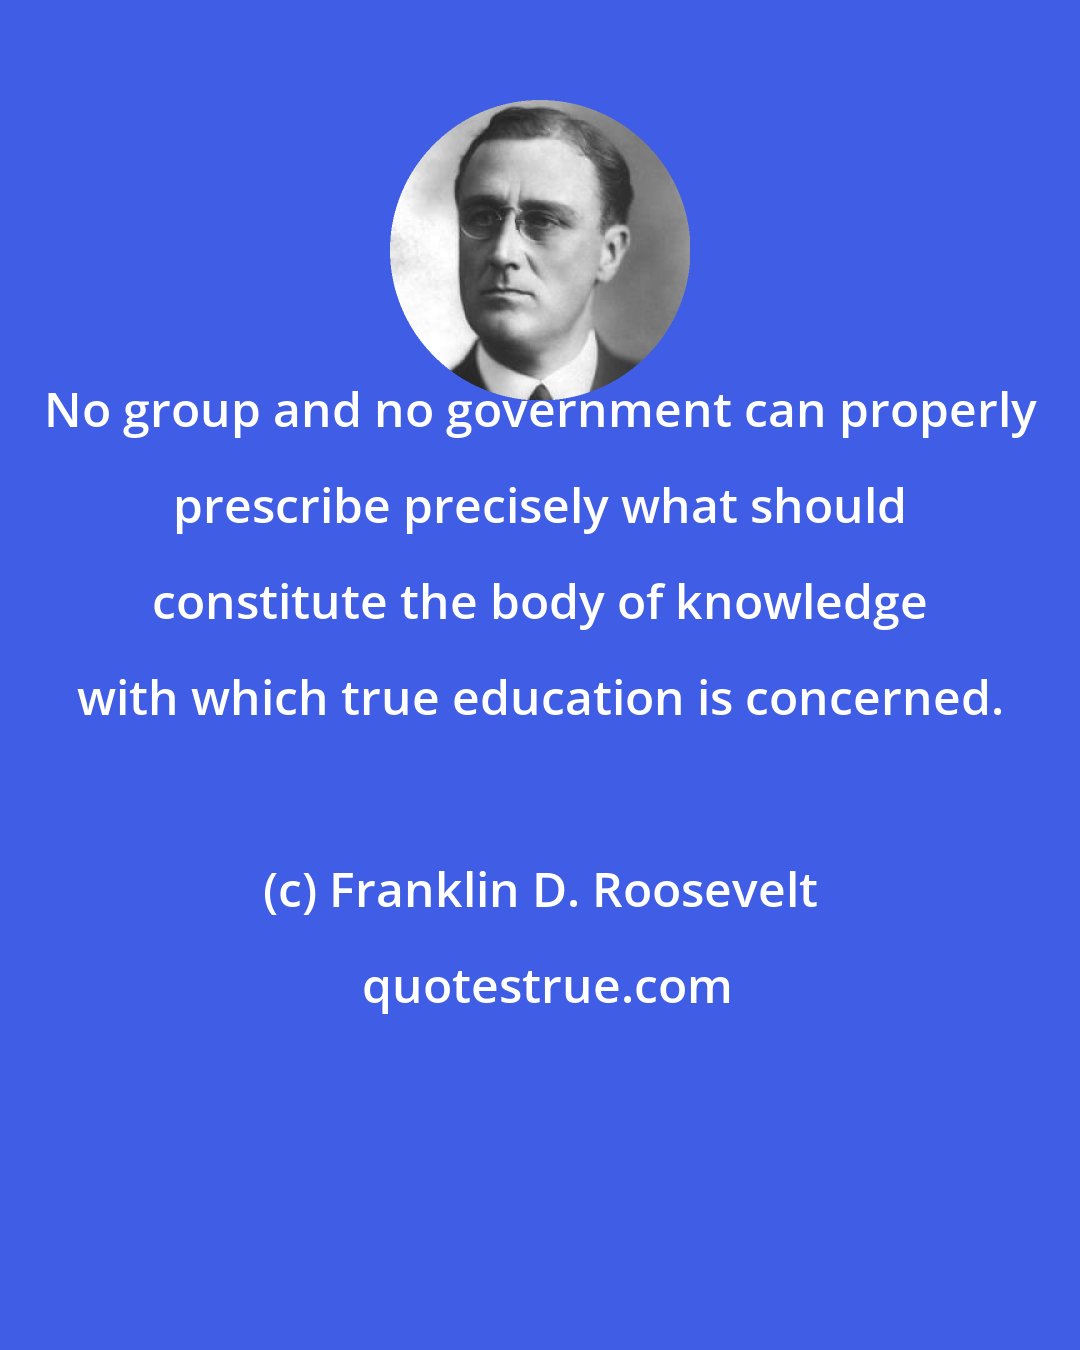 Franklin D. Roosevelt: No group and no government can properly prescribe precisely what should constitute the body of knowledge with which true education is concerned.